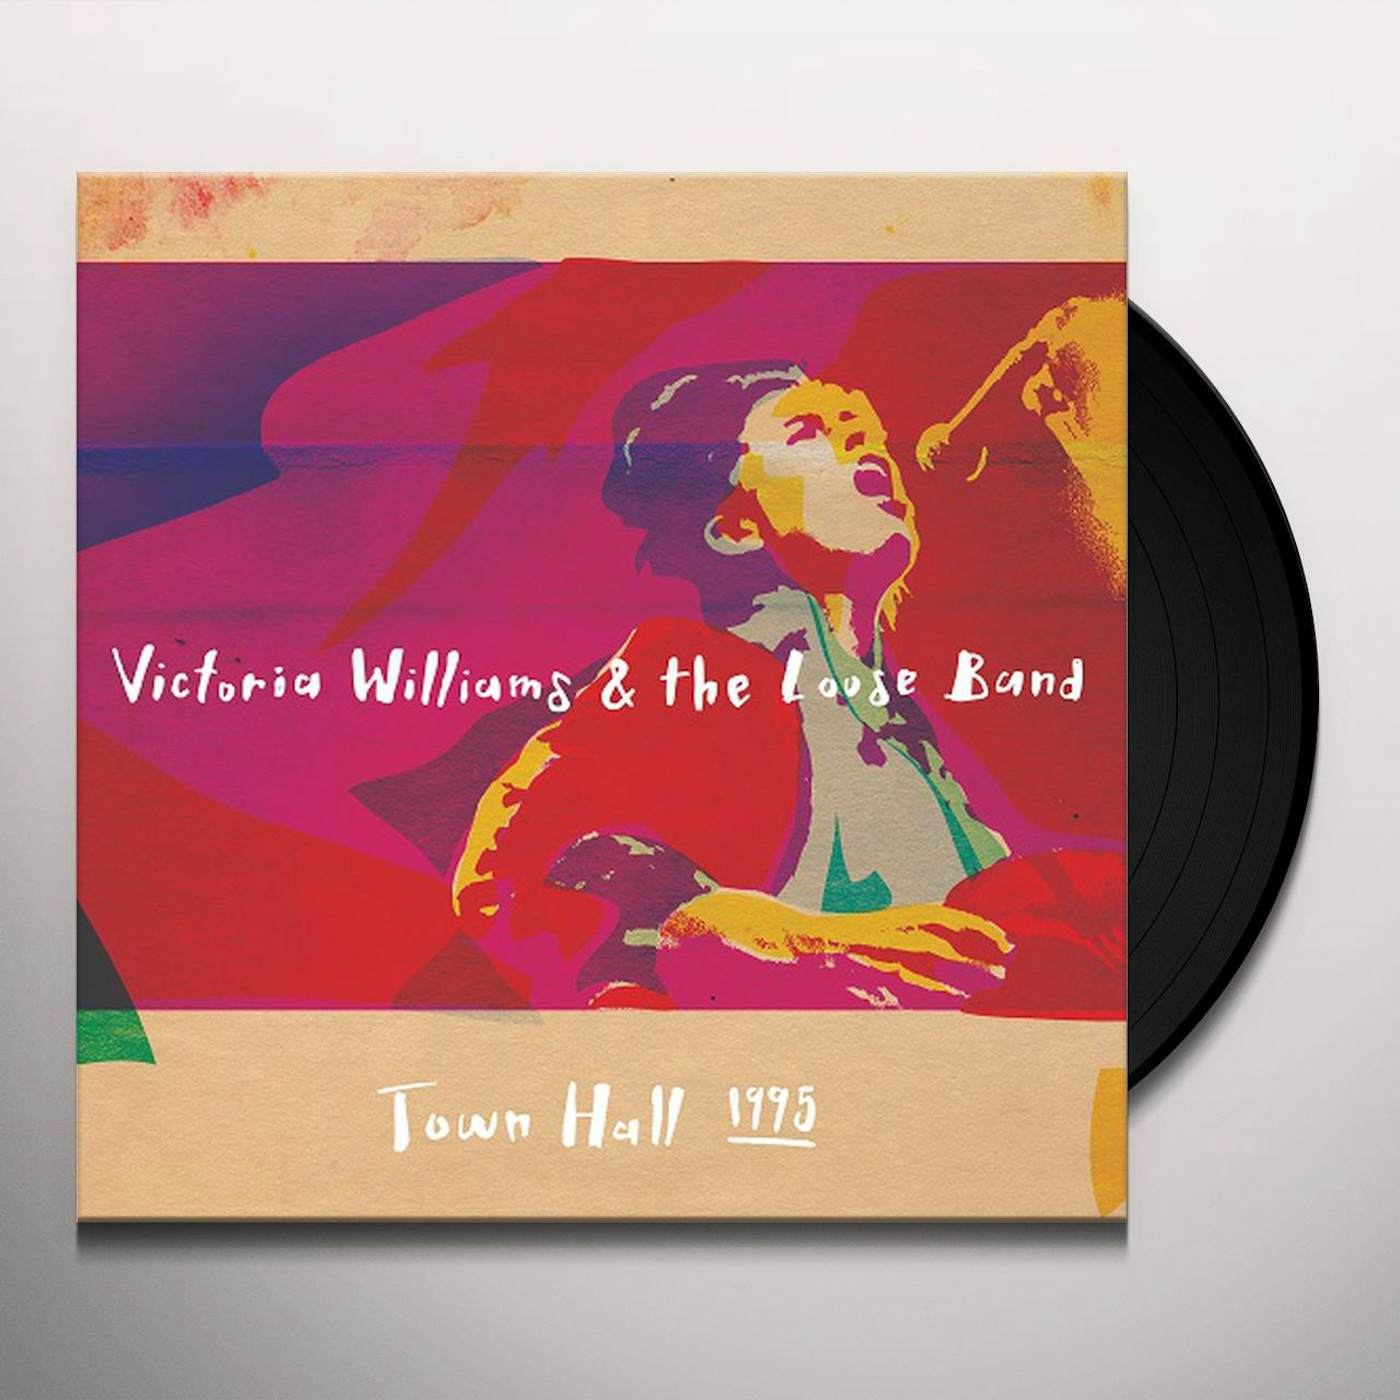 VICTORIA WILLIAMS & THE LOOSE BAND TOWN HALL 1995 Vinyl Record